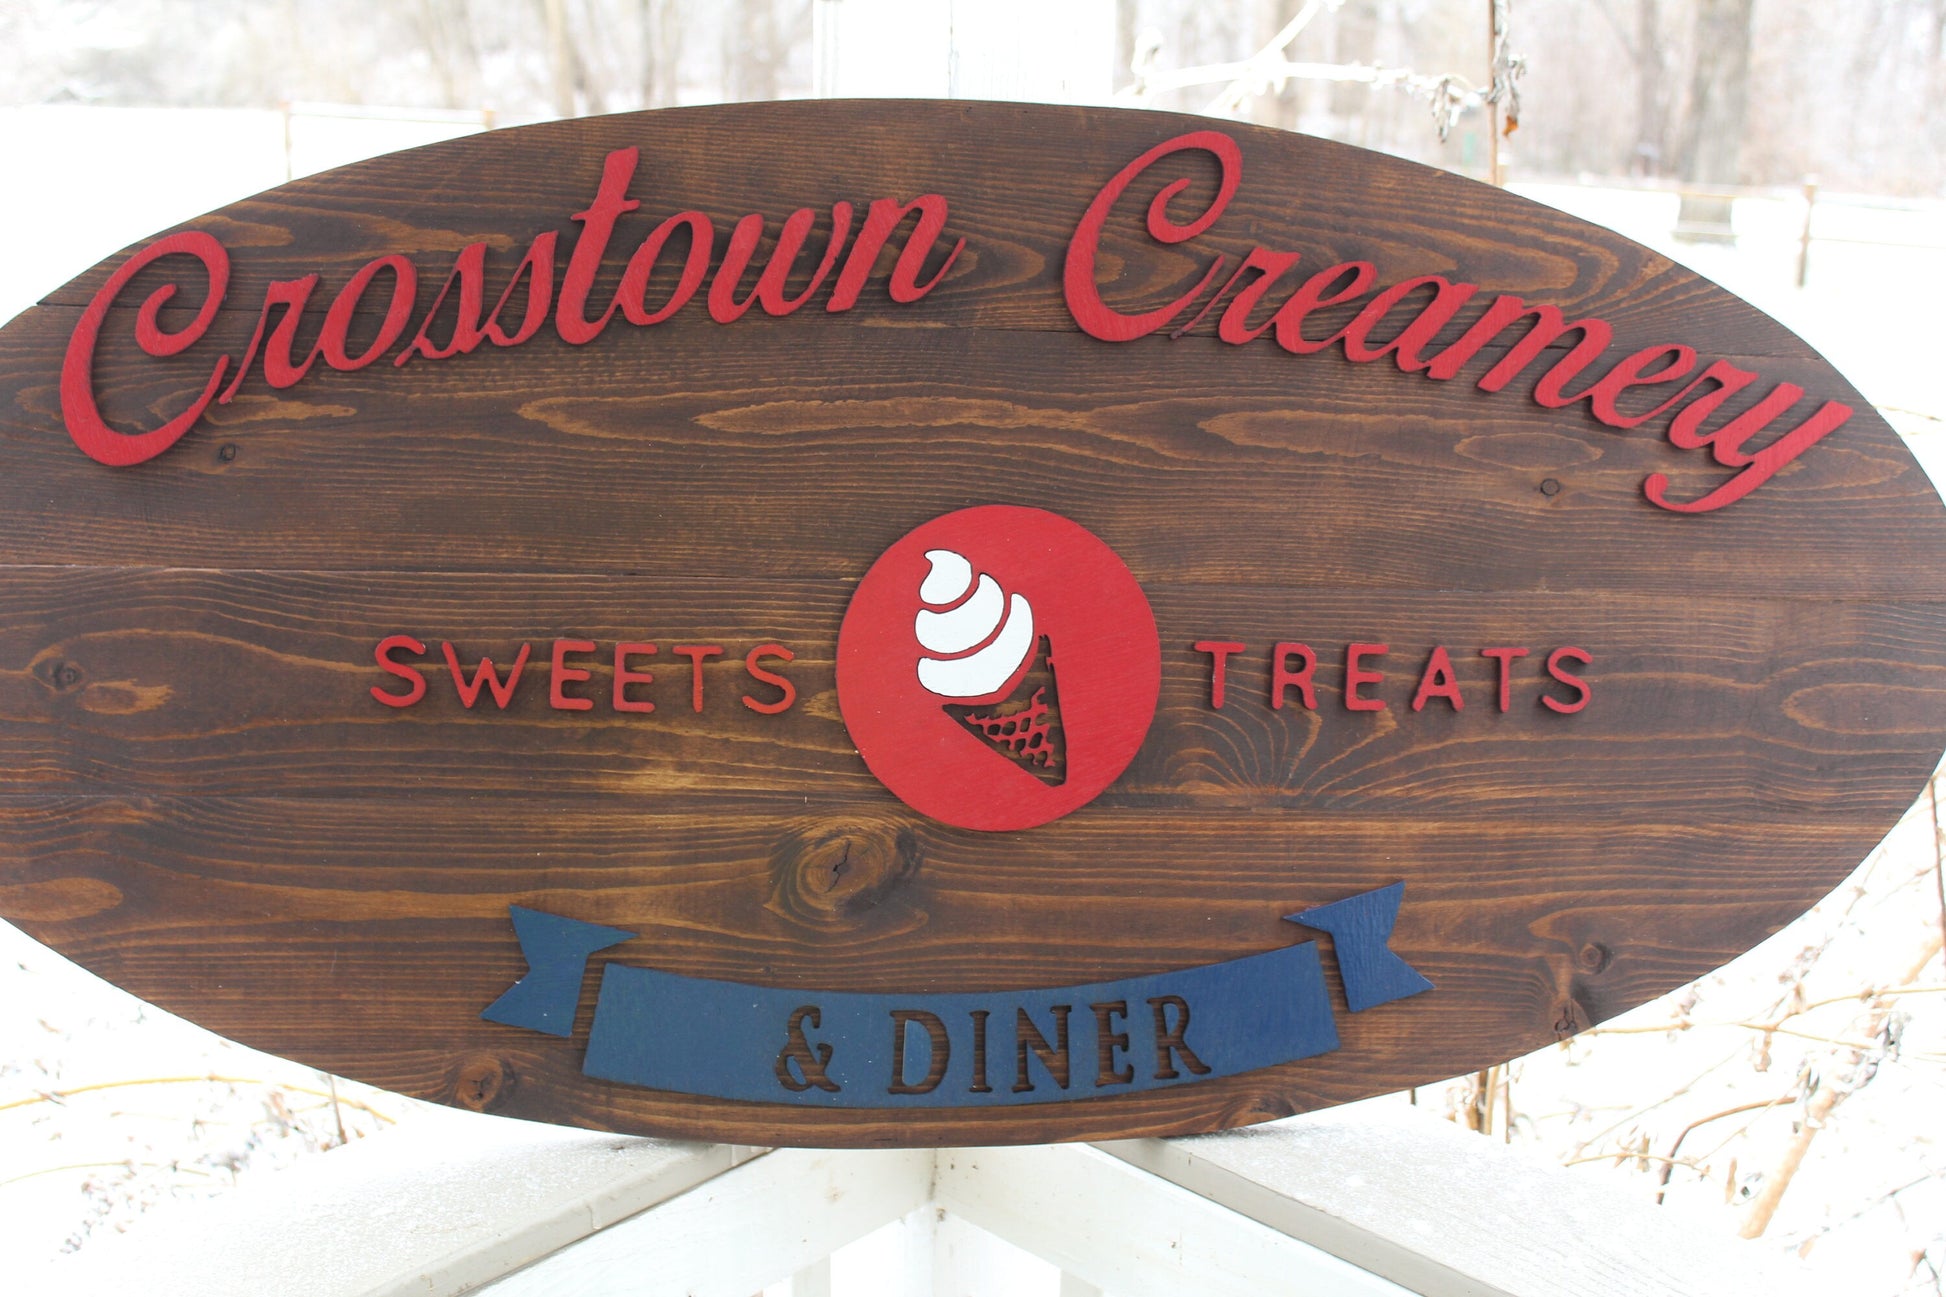 Large Custom Business Sign, Ice Cream Shop, Oval, We Use Your Graphic and Colors, Business Logo, 3D, Large, Wood, Sign Footstepsinthepast